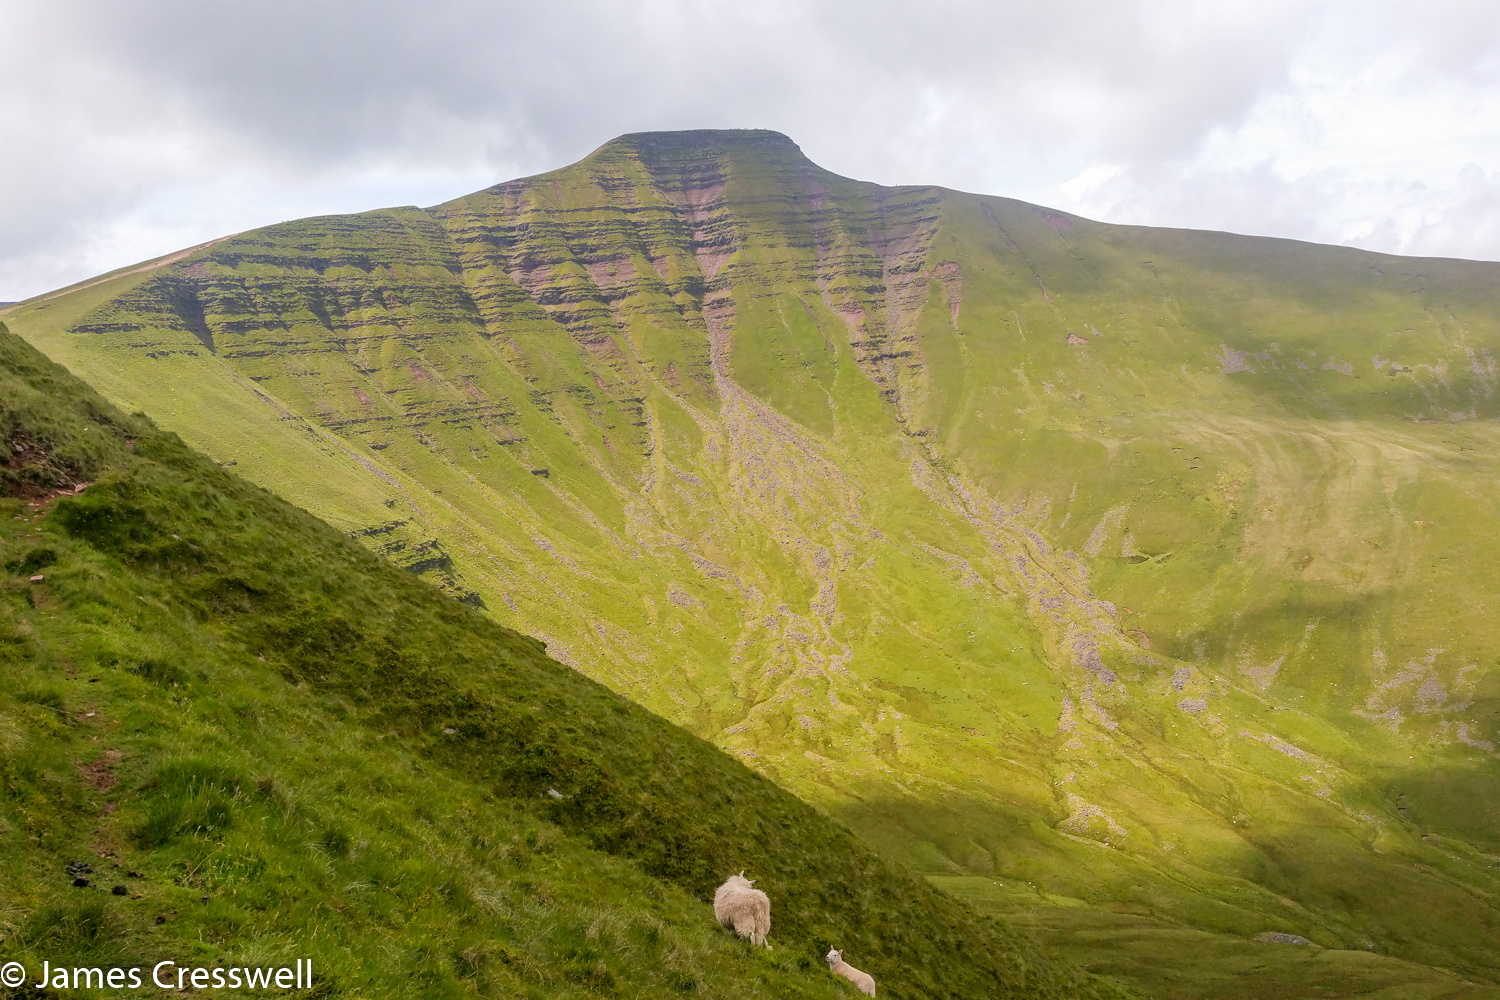 A photograph of a green mountain, Pen-y-Fan, taken on a GeoWorld Travel  Wales geology day tour